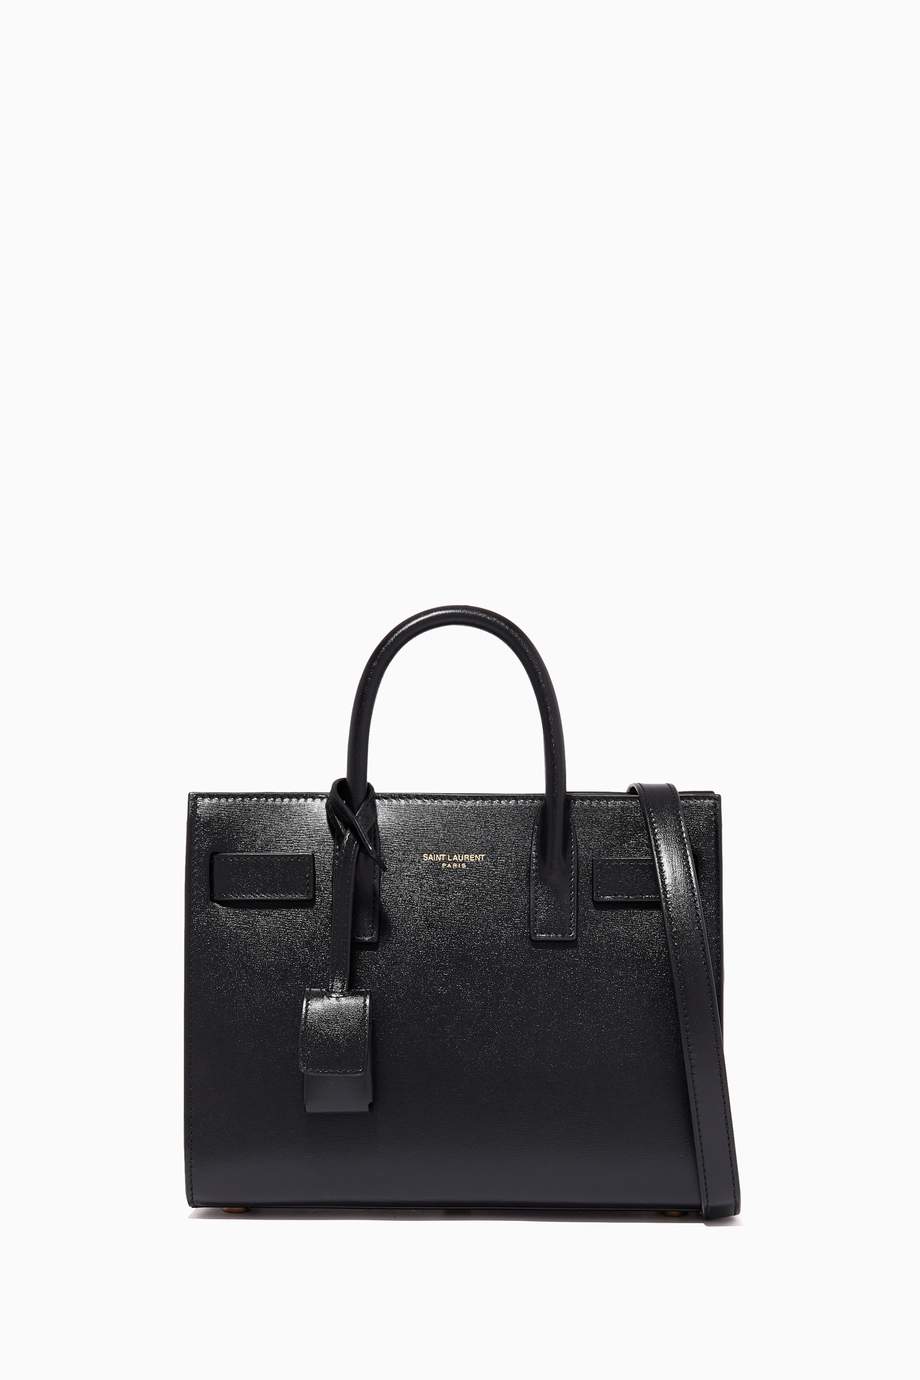 Shop SAINT LAURENT Black Nano Day Tote in Grained Leather for Women | Ounass UAE